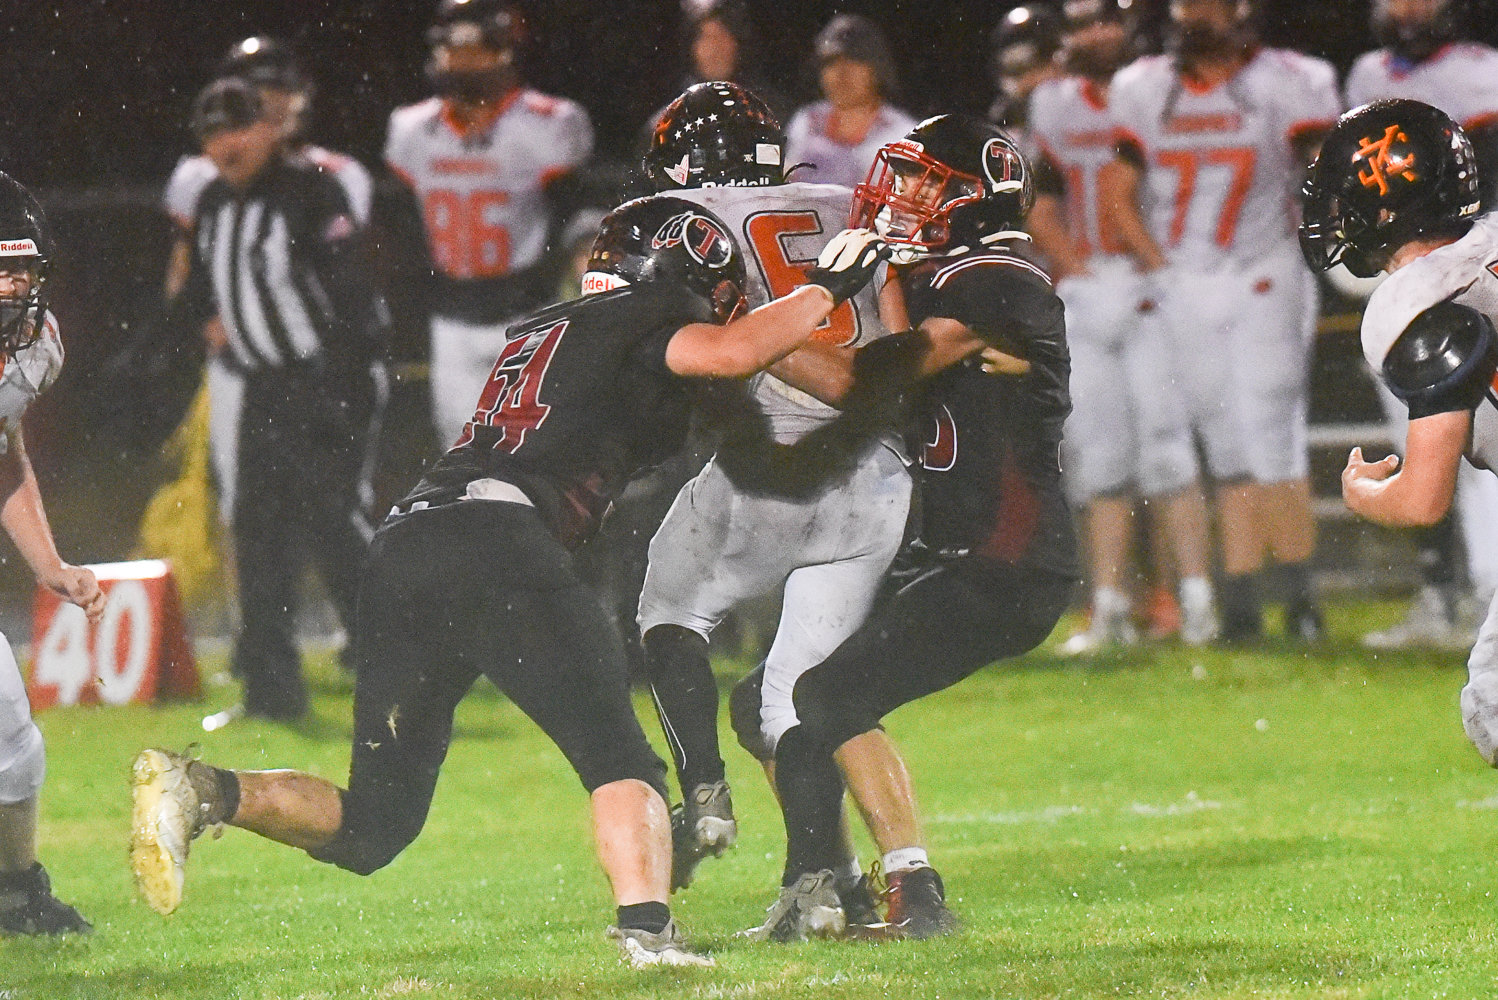 Toledo's Bayron Rodriguez (54) and Trevin Gale (33) meet at Kalama quarterback Aiden Brown for a sack during the second half of the Riverhawks' 35-0 win over the Chinooks on Oct. 21.